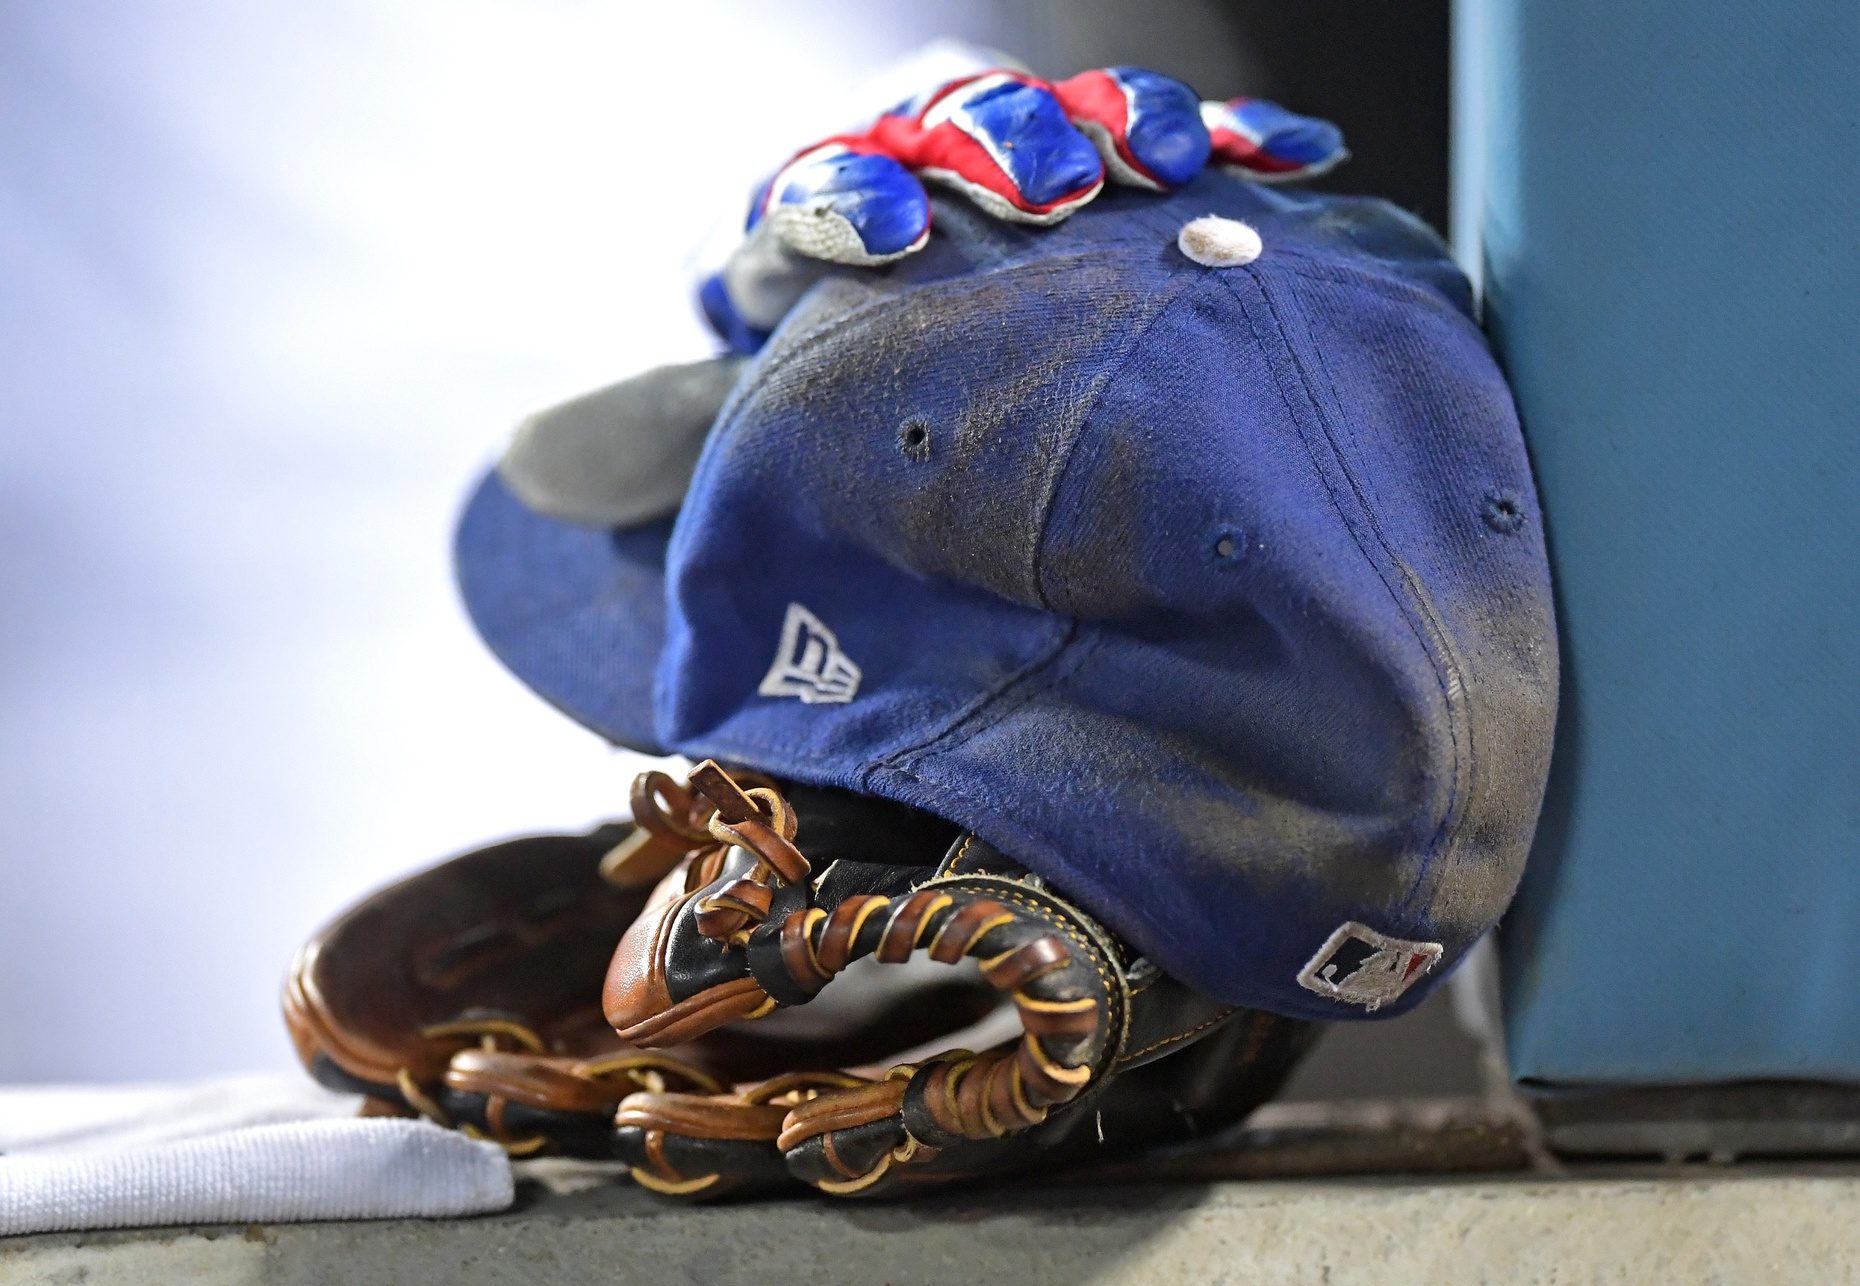 Dodgers hat and glove